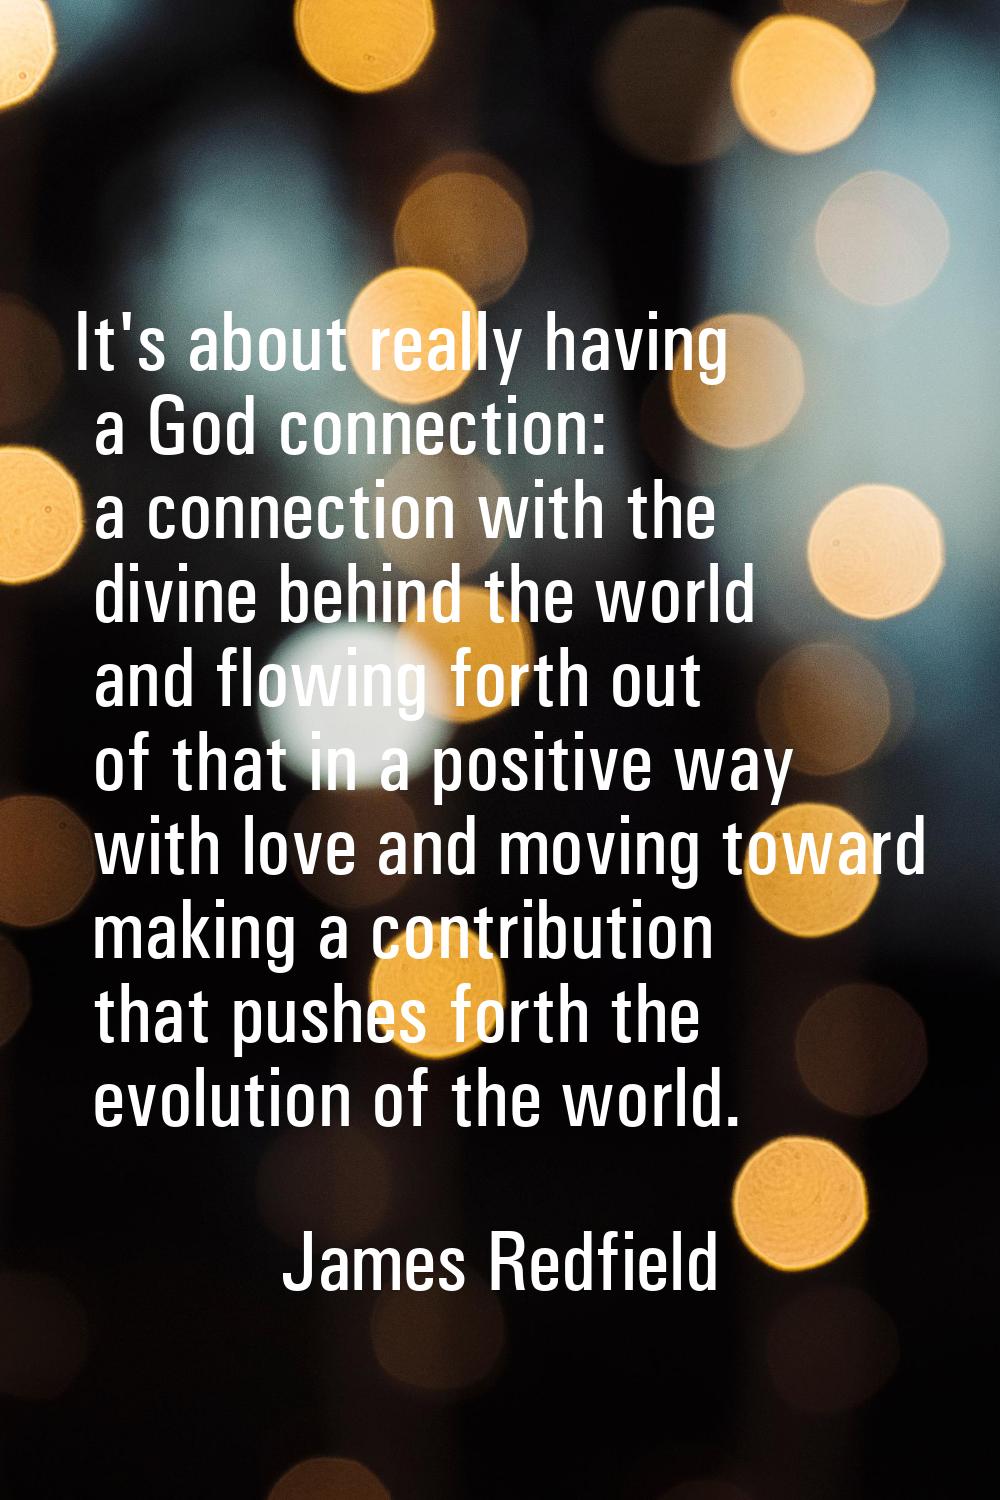 It's about really having a God connection: a connection with the divine behind the world and flowin